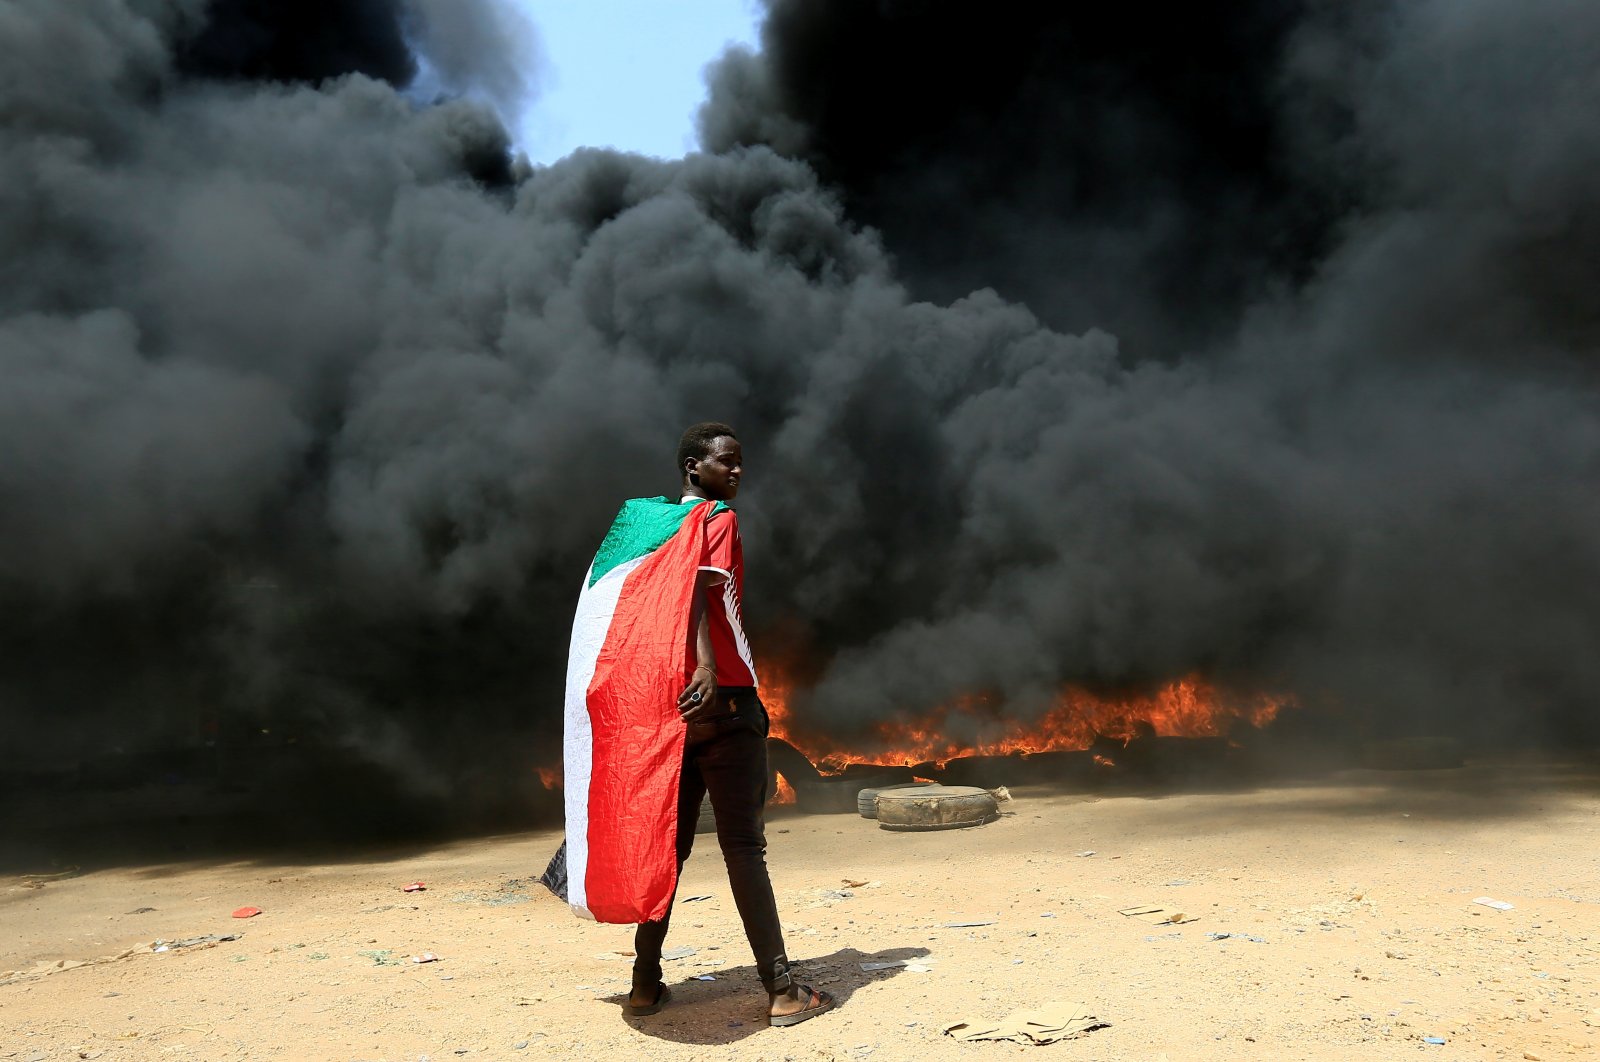 A person wearing a Sudanese flag stands in front of a burning pile of tires during a protest against the prospect of military rule in Khartoum, Sudan, Oct. 21, 2021. (REUTERS Photo)